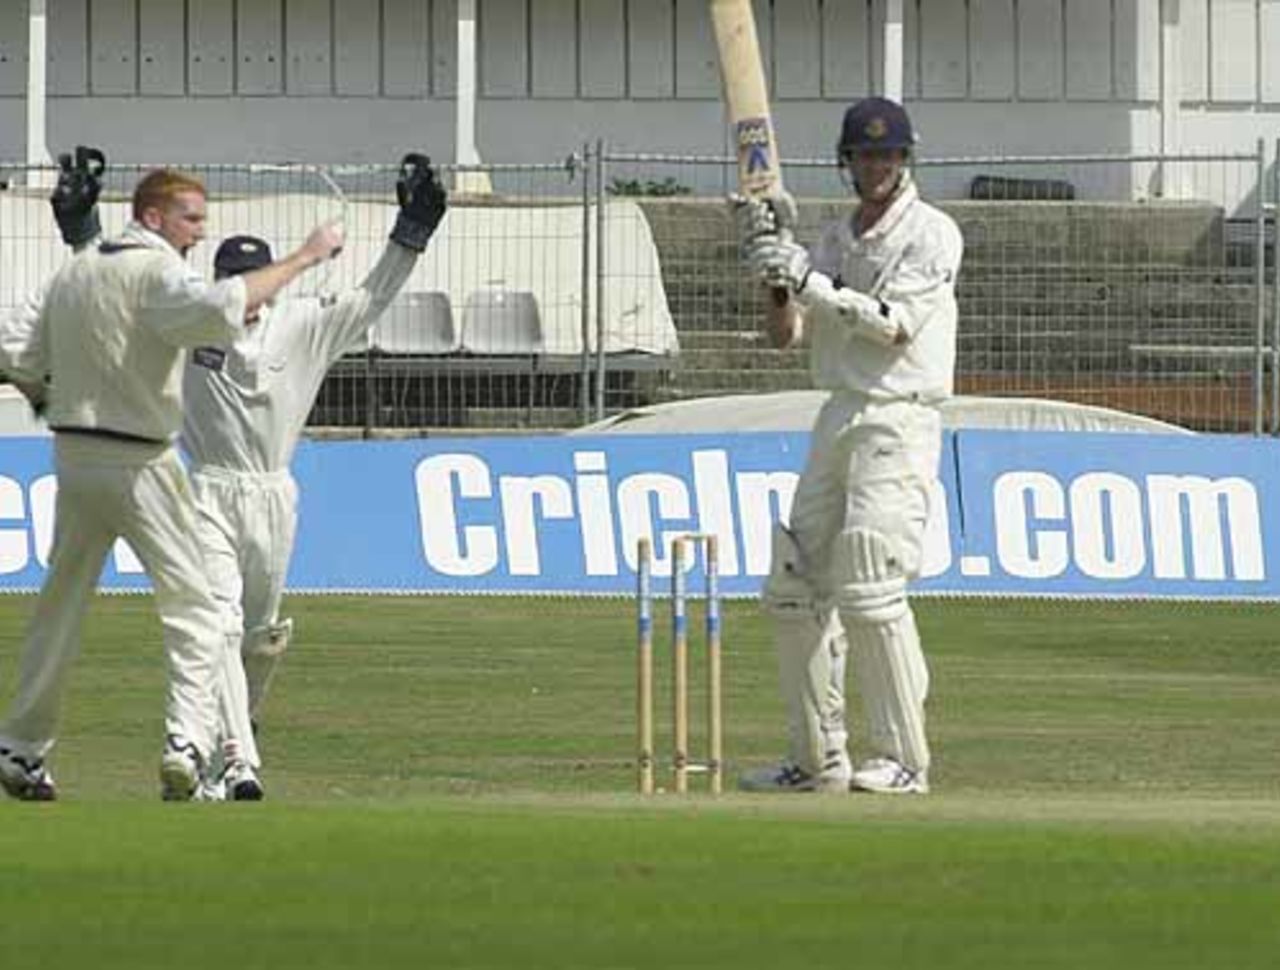 Lancs opener Mark Chilton is bowled by the gesturing Kirby, CricInfo Championship, 27th July 2001, Leeds